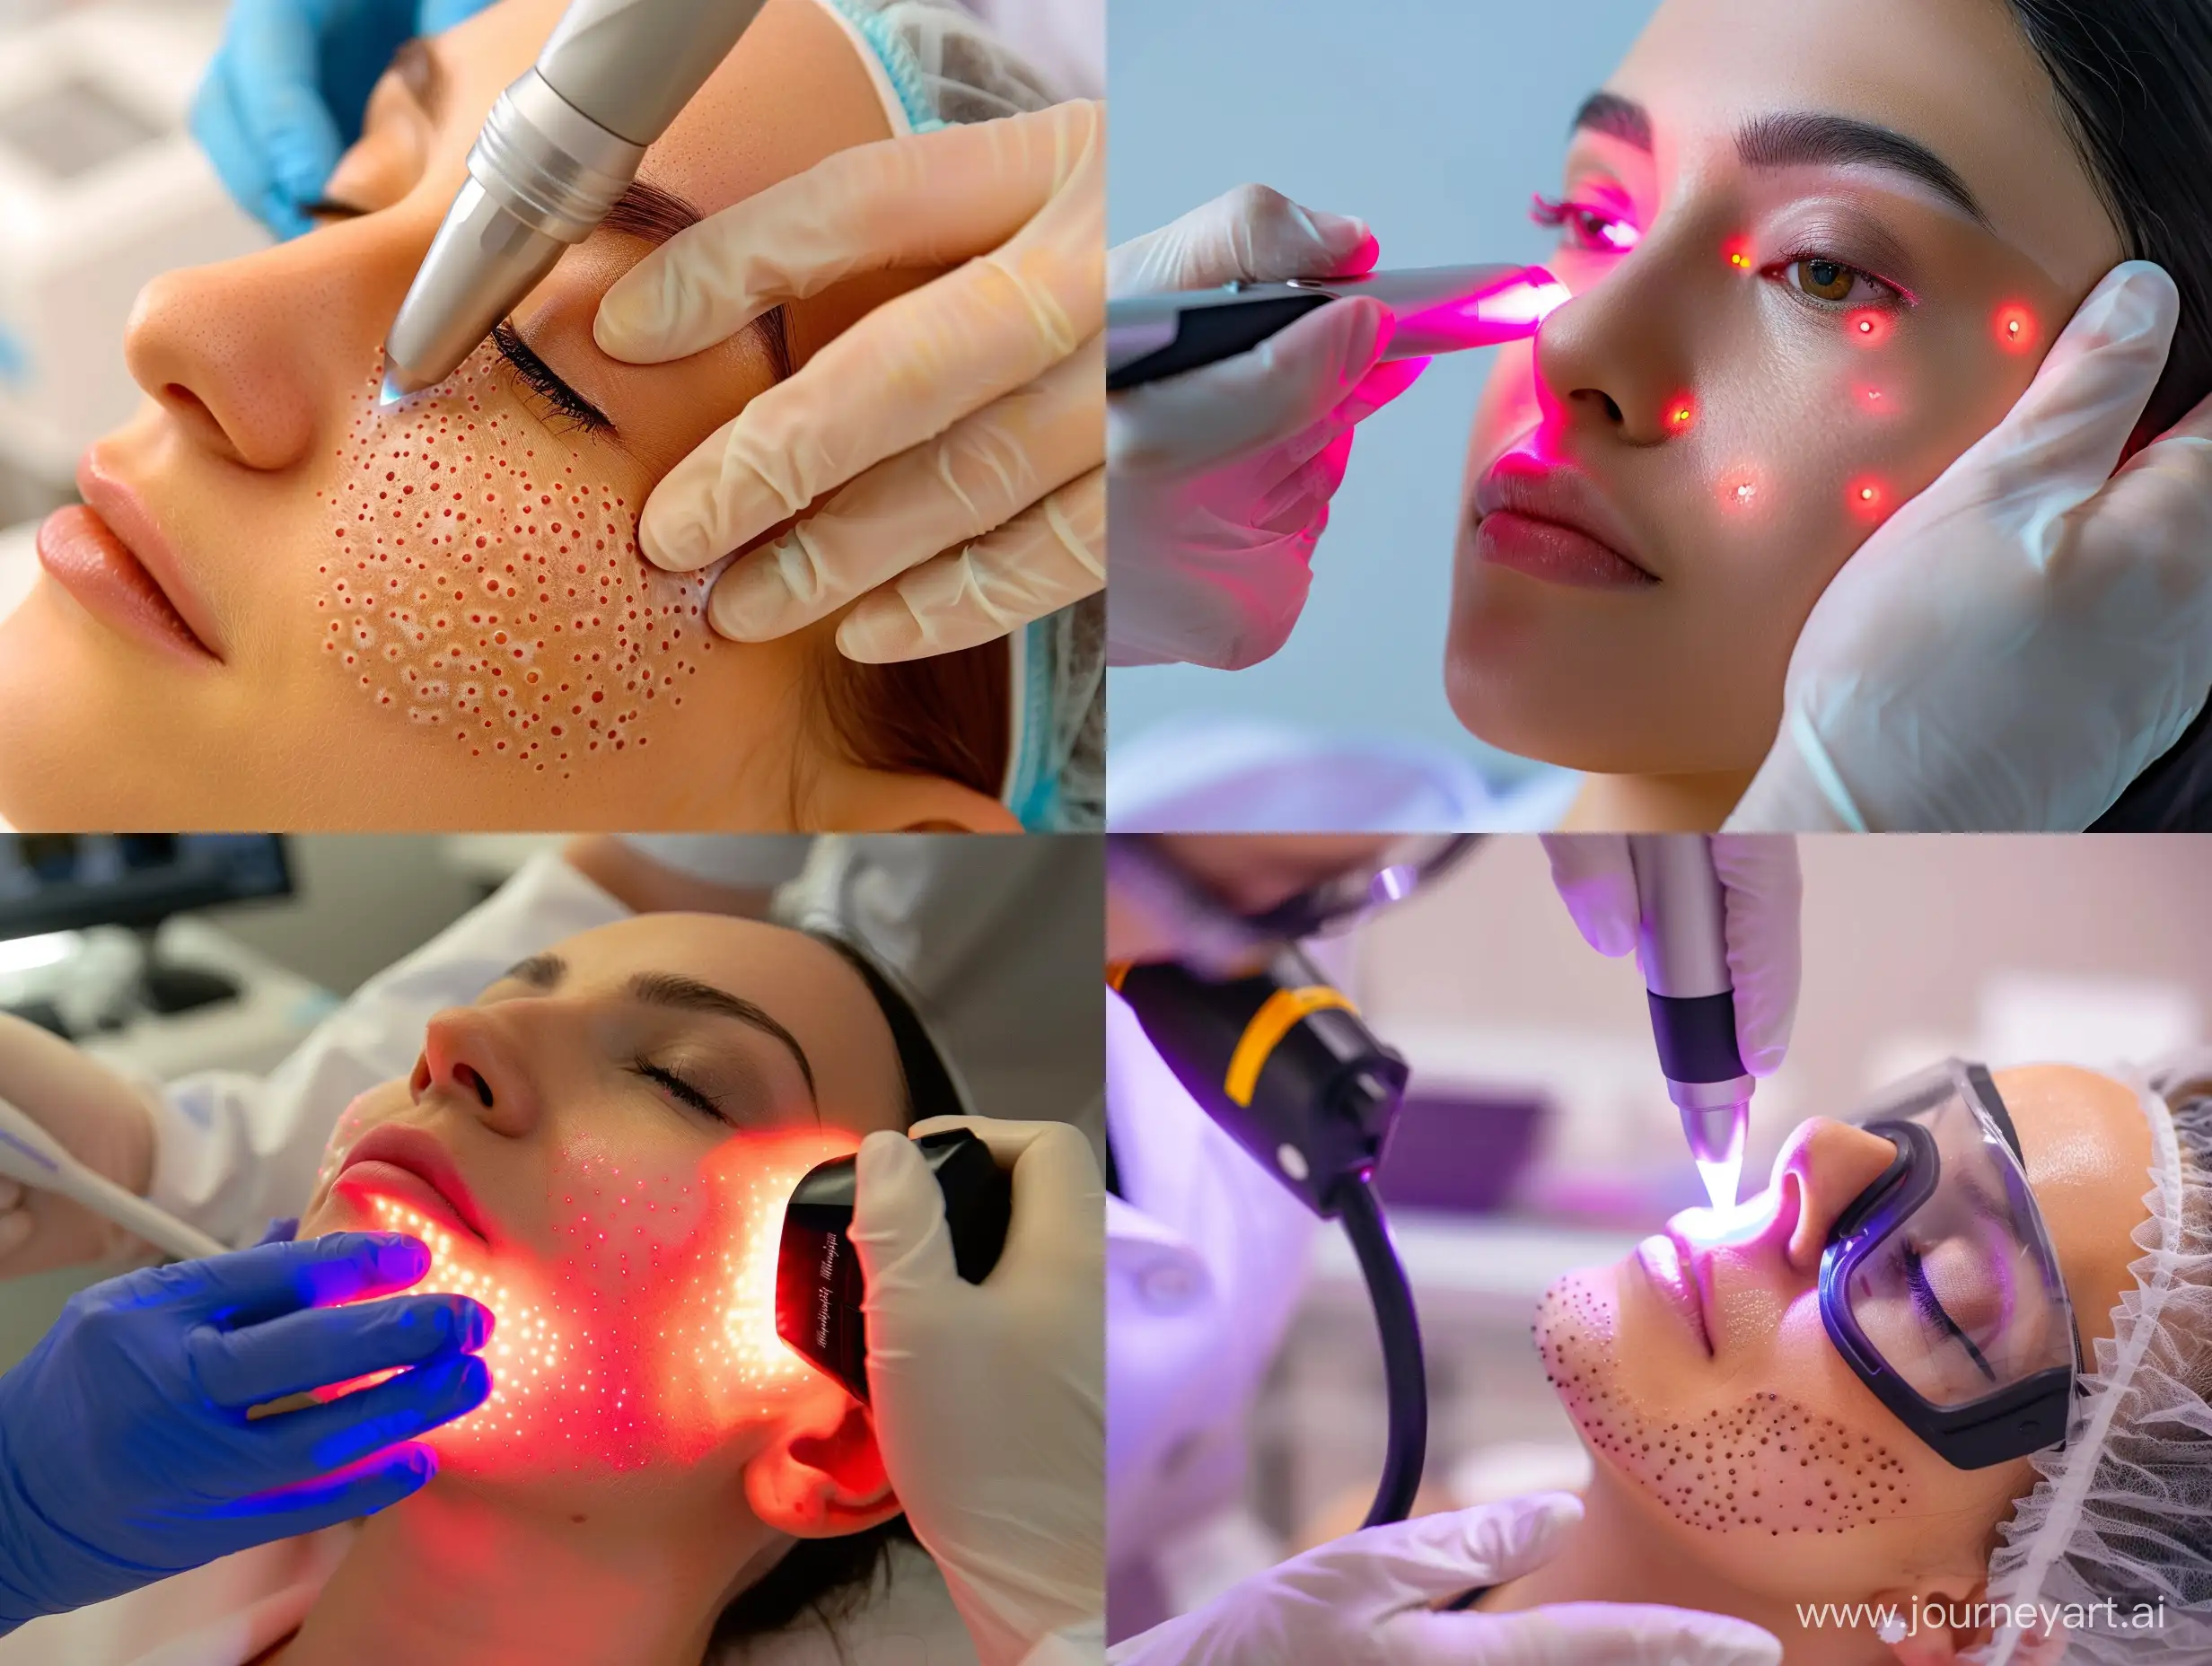 Neodymium-Laser-Treatment-for-Keratomas-Clinical-Removal-by-Expert-Doctor